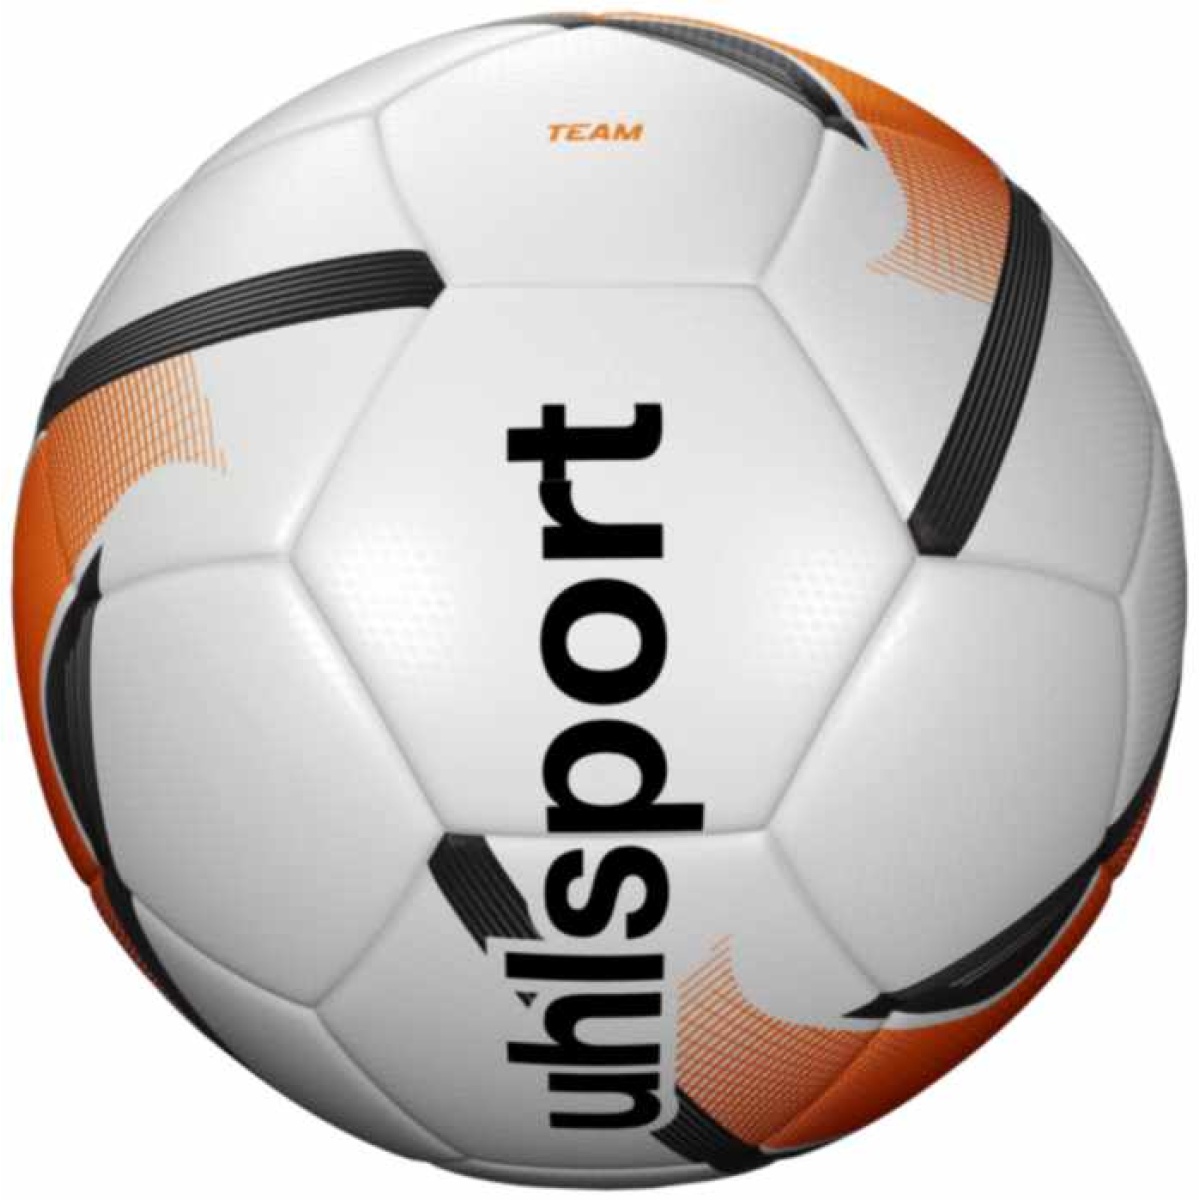 Accessory - Uhlsport Team Training Ball, Canvey Island Youth FC, Canvey Island Ladies FC, Canvey Island United FC, Rayleigh FC, Linford Wanderers FC, Essex Comets FC, Supreme Youth FC, Thundersley Rovers FC, Essex Royals FC, Benfleet Villa FC, Benfleet FC, Island Boys FC, Rayleigh Town FC